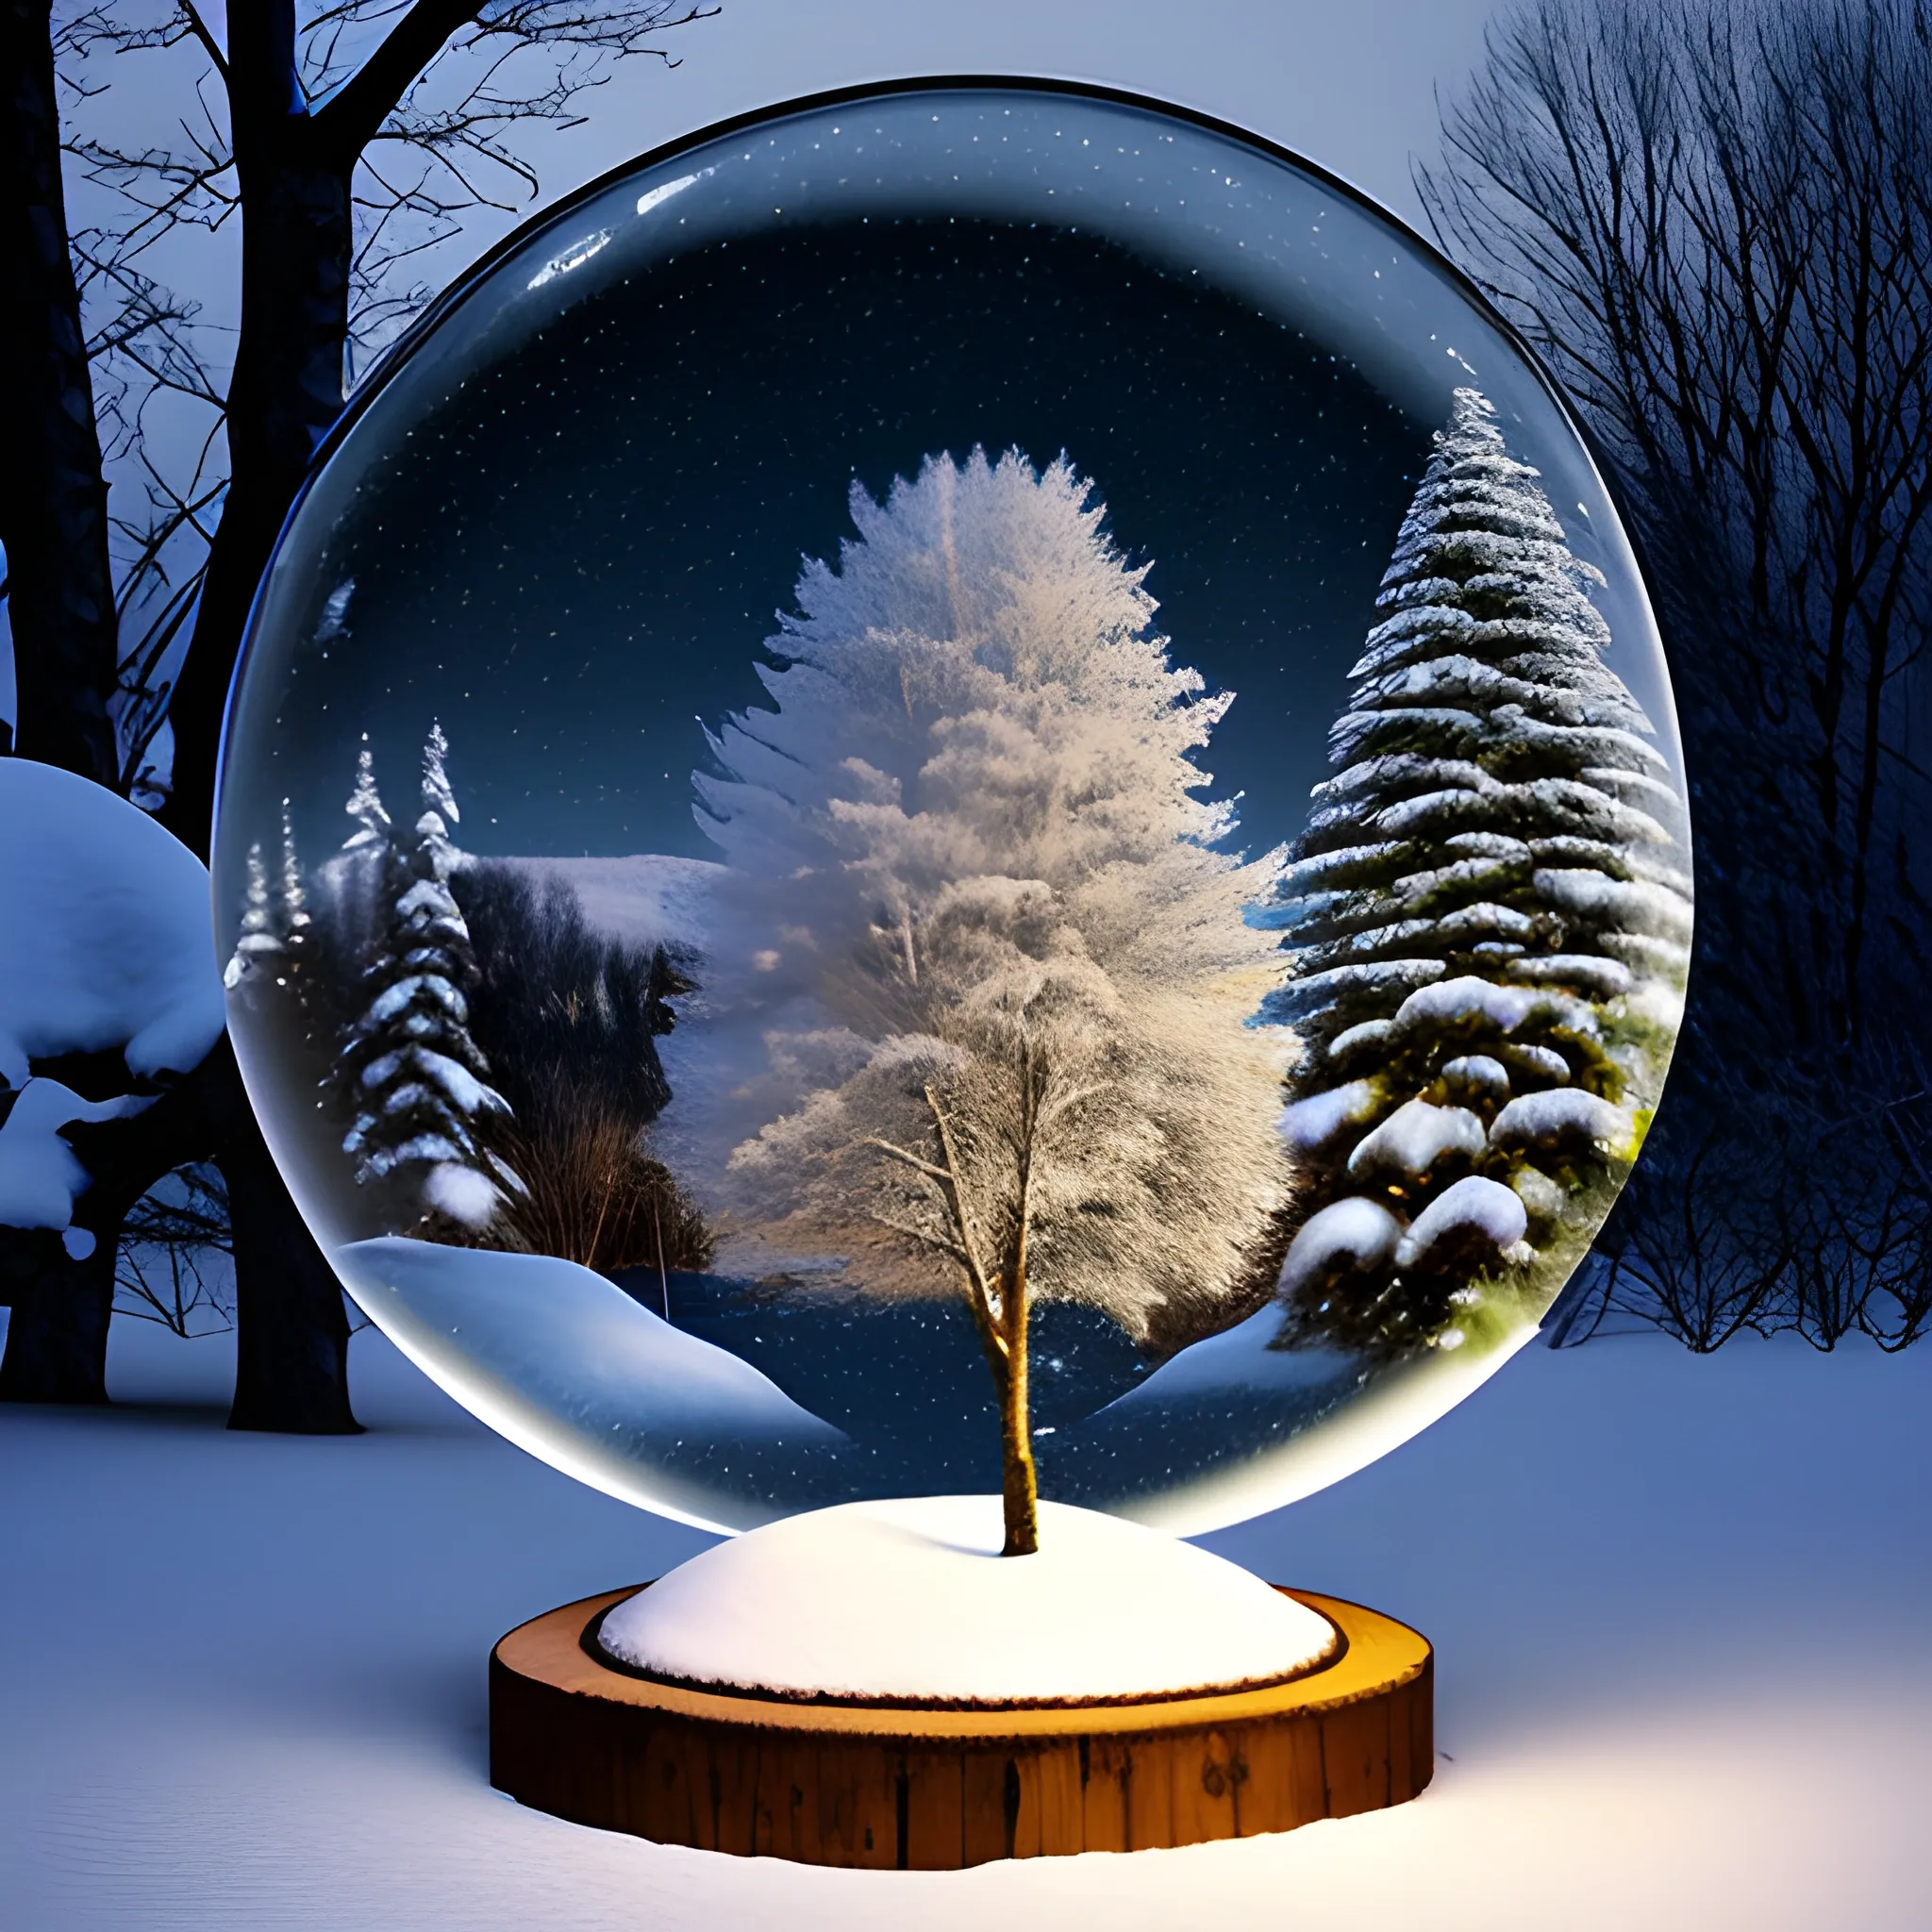 a snowy landscape, in the foreground a tree with fireflies like Christmas lights, all inside a glass sphere